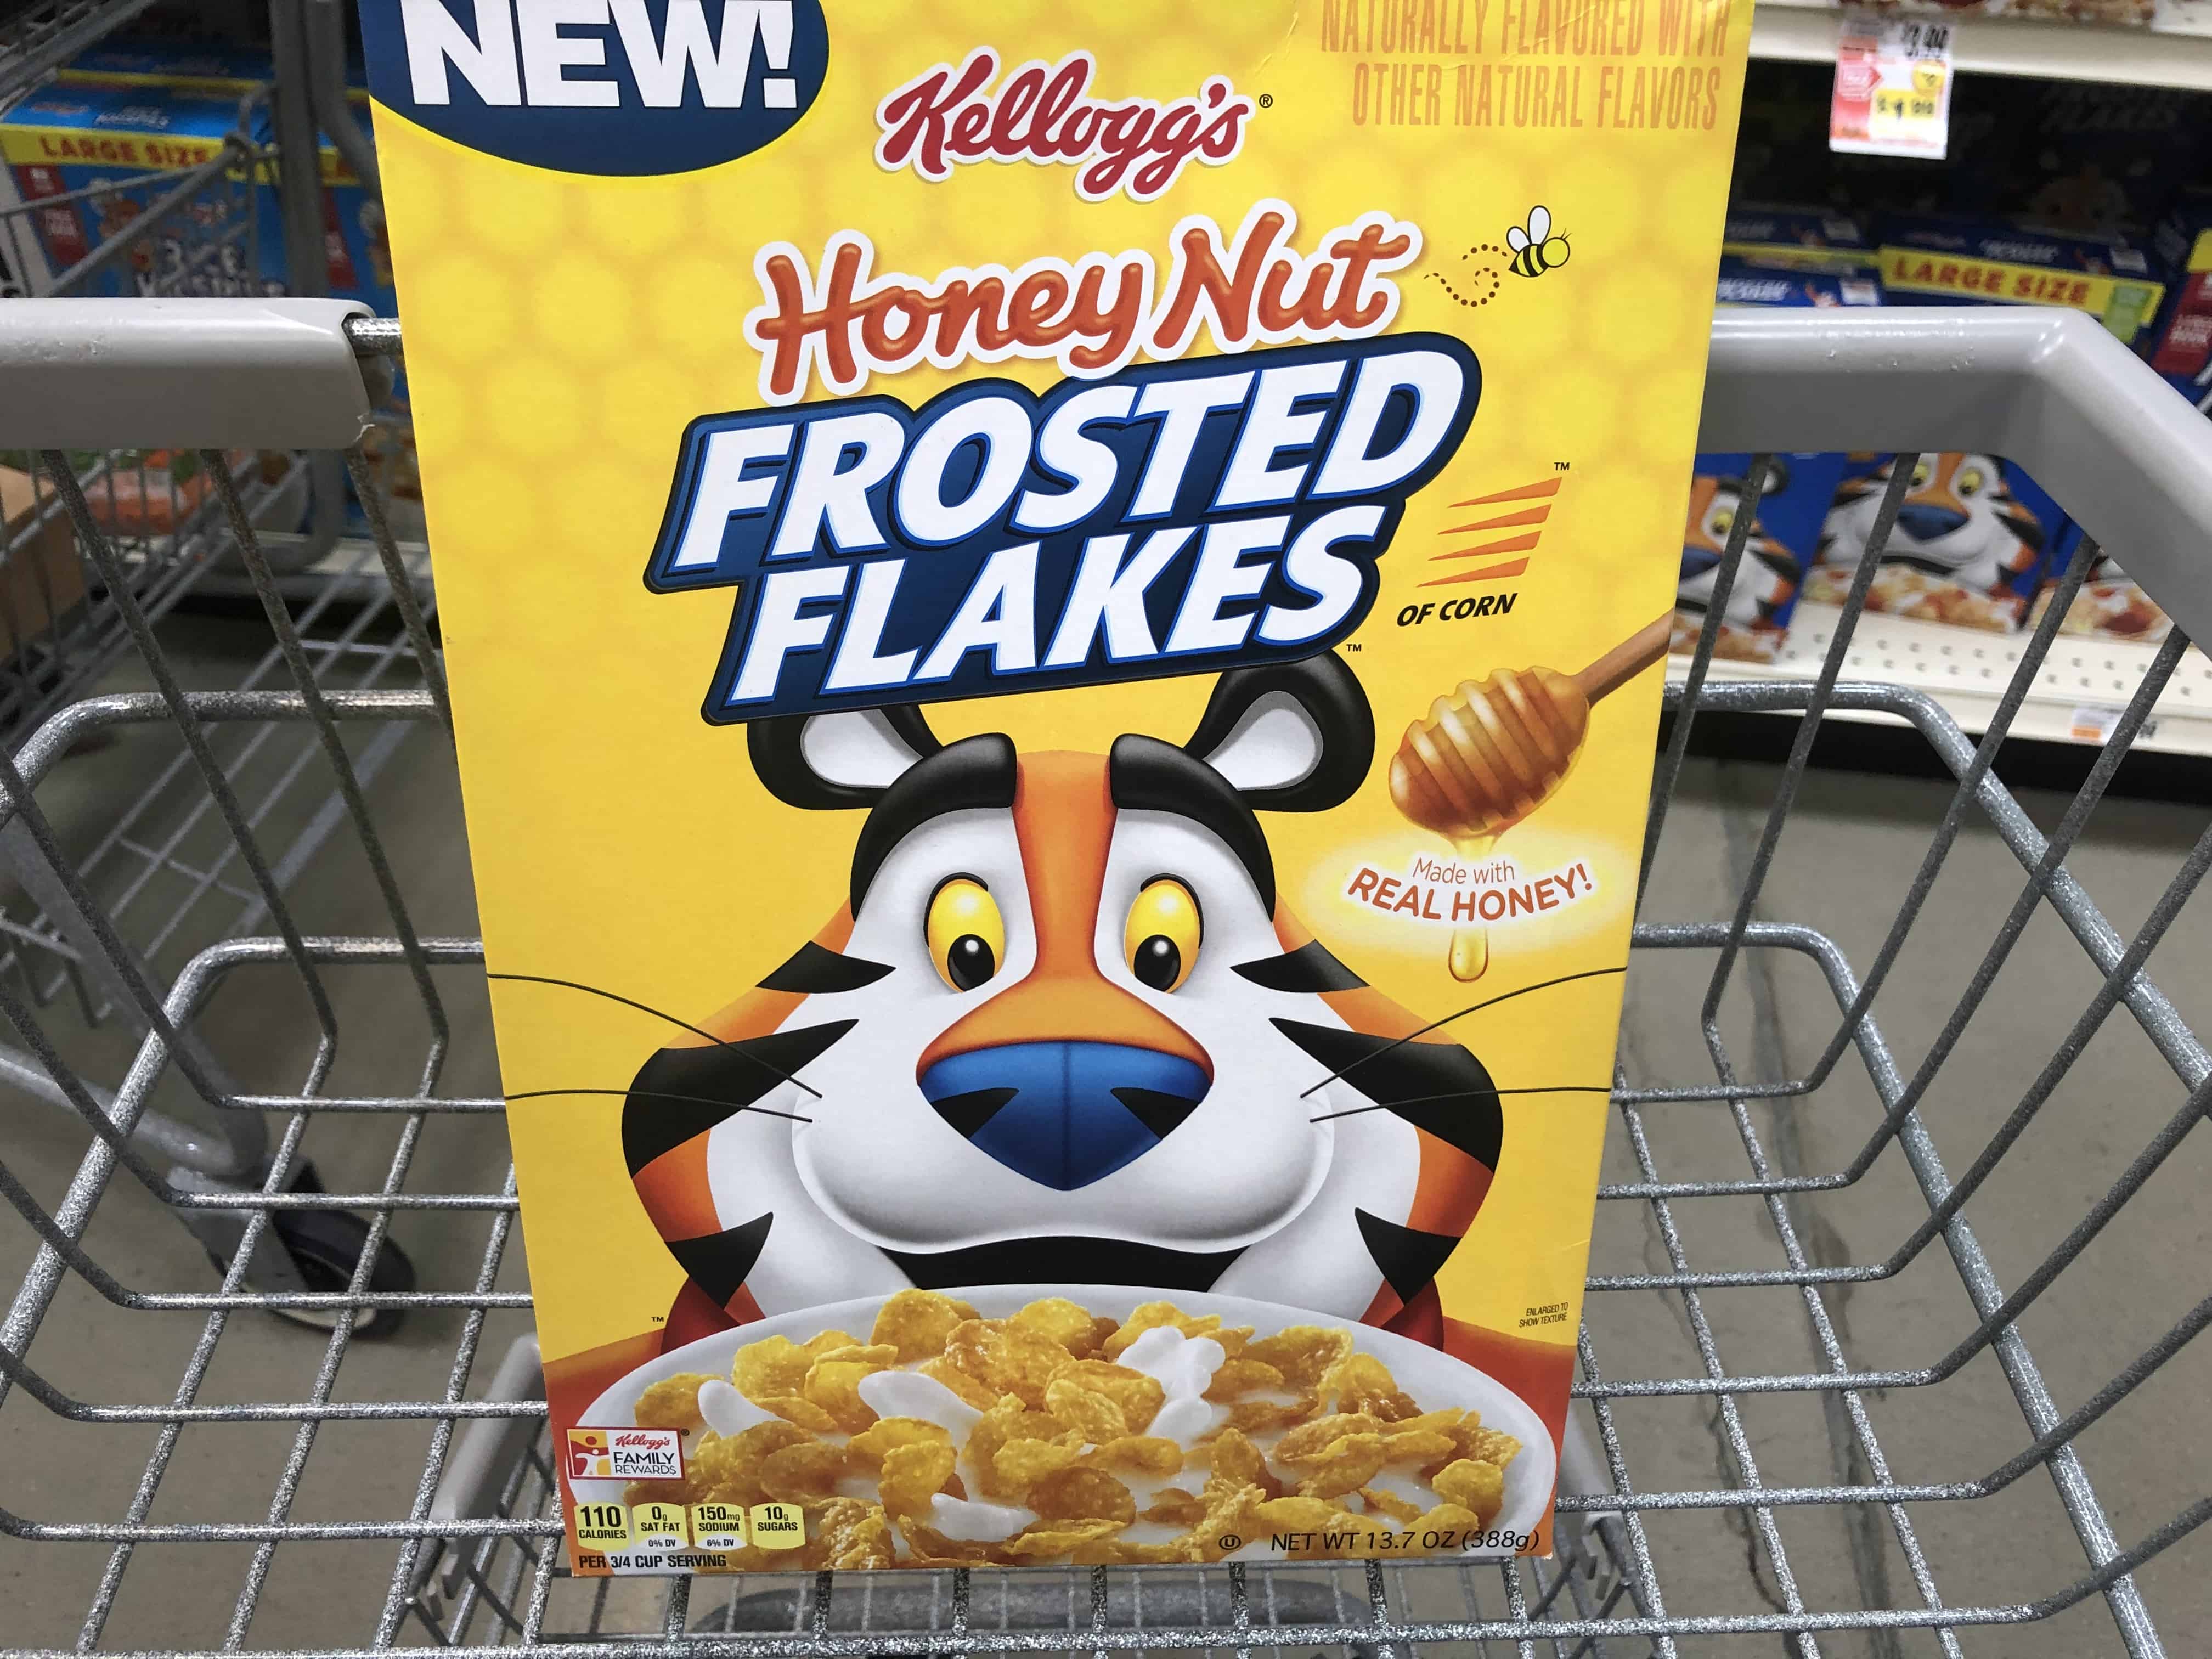 ShopRite: Kellogg’s Honey Nut Frosted Flakes Cereal ONLY $0.39 Starting 12/15!